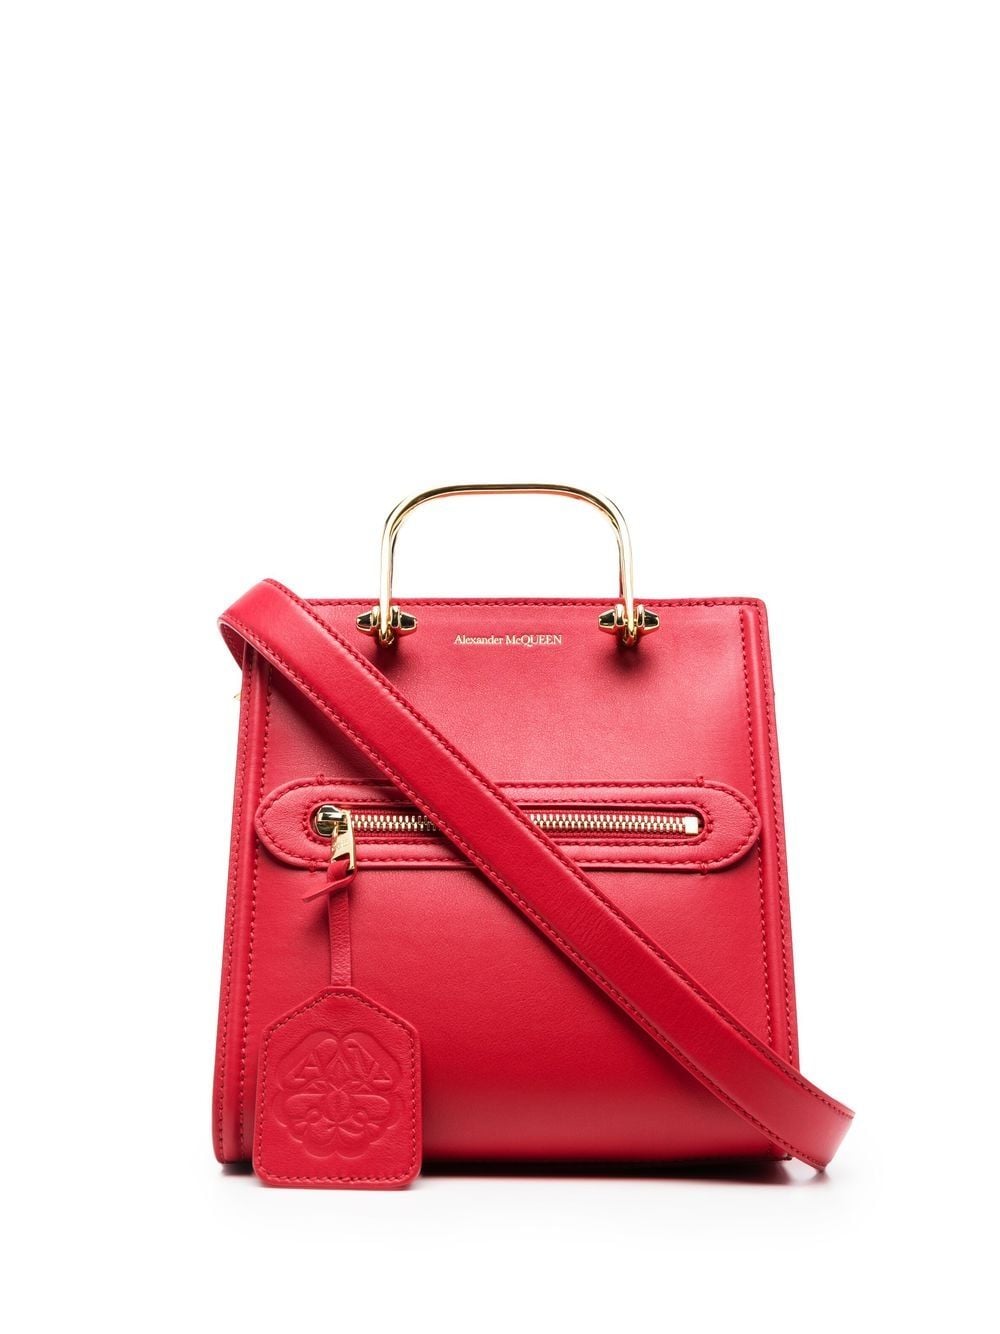 Alexander McQueen The Short Story tote bag - Red